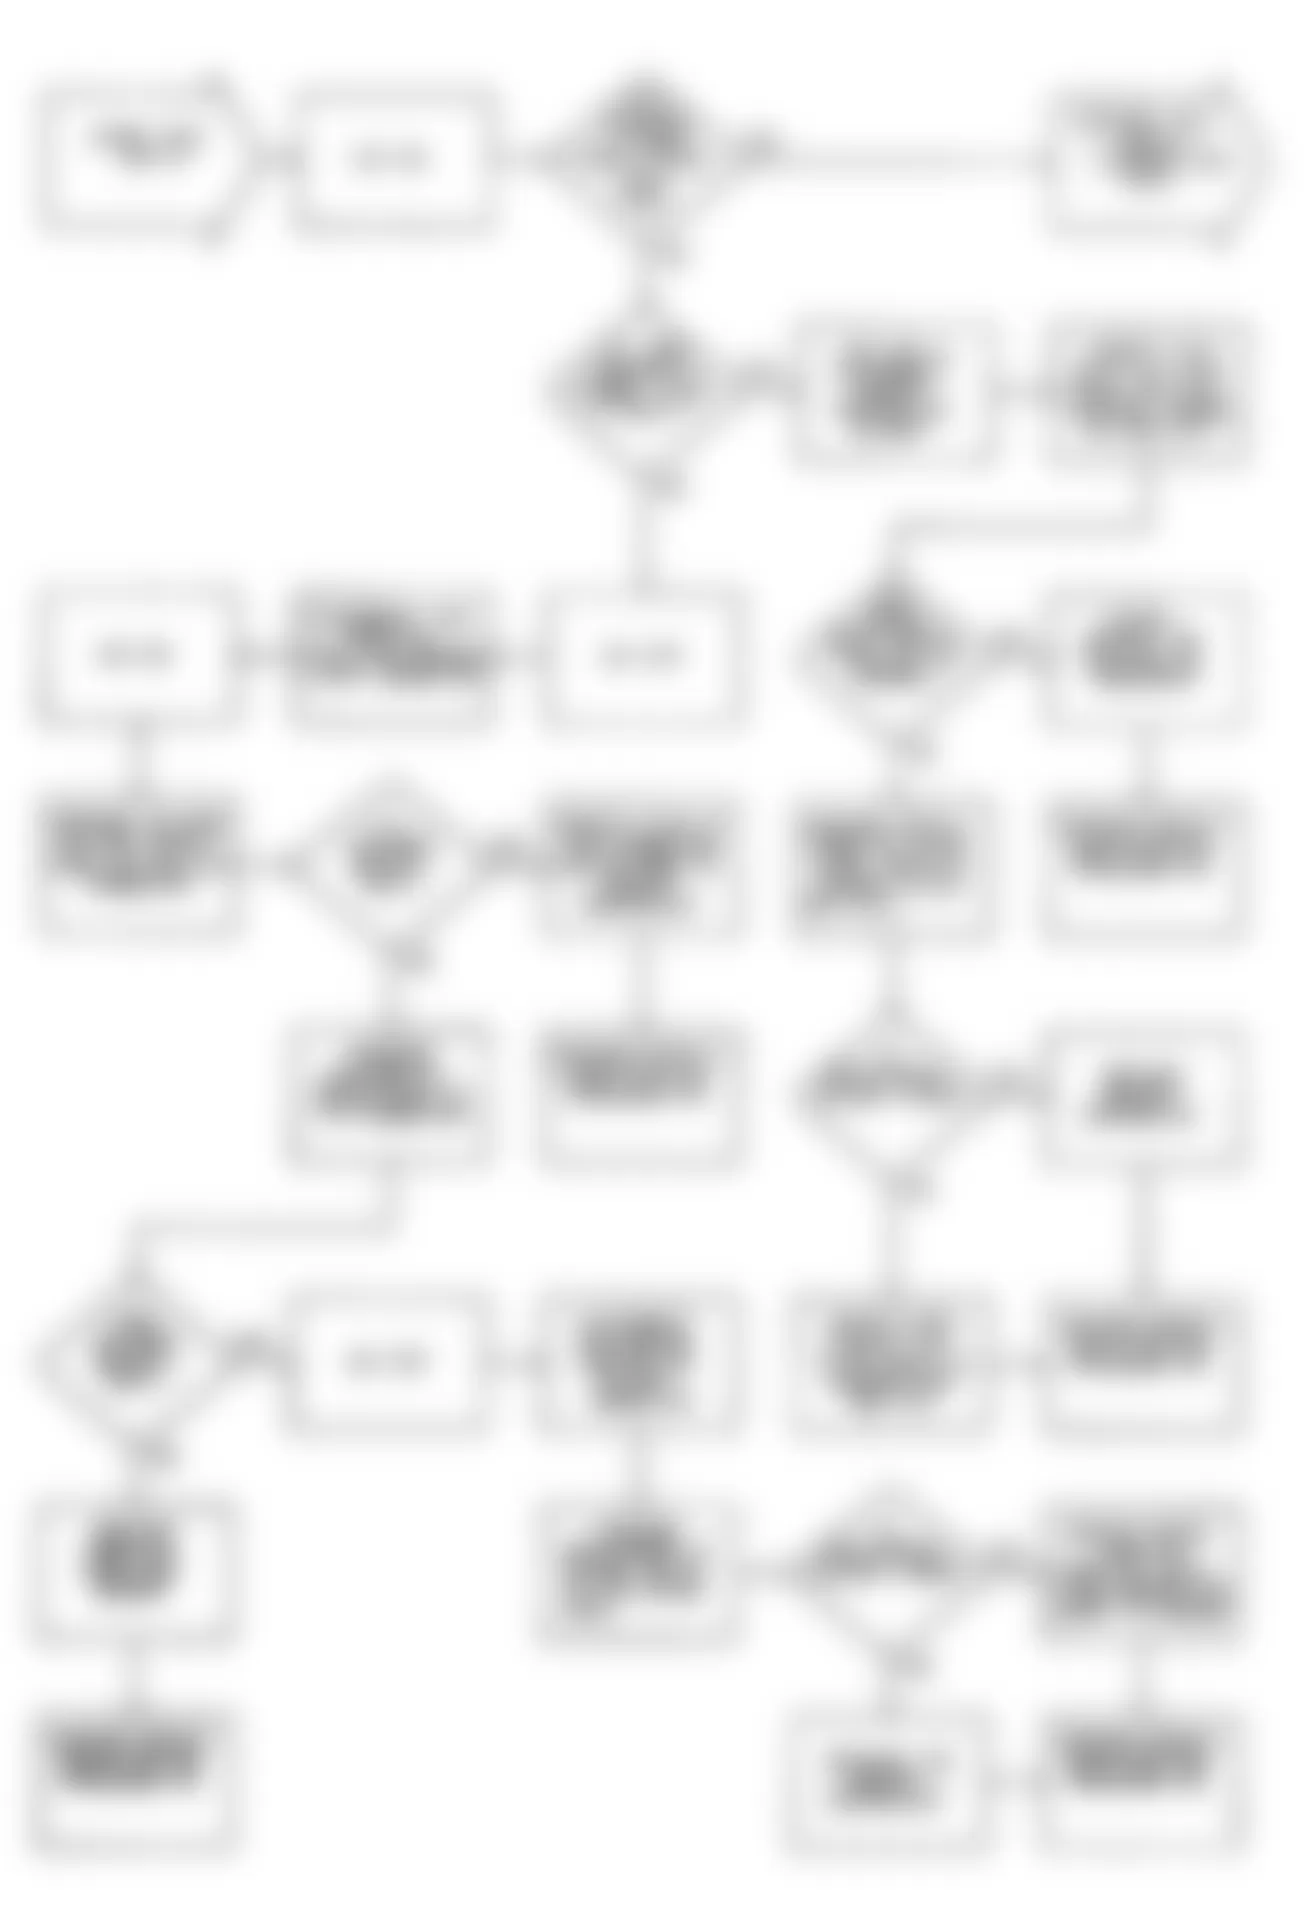 Chrysler LeBaron 1990 - Component Locations -  DR-13: Flow Chart